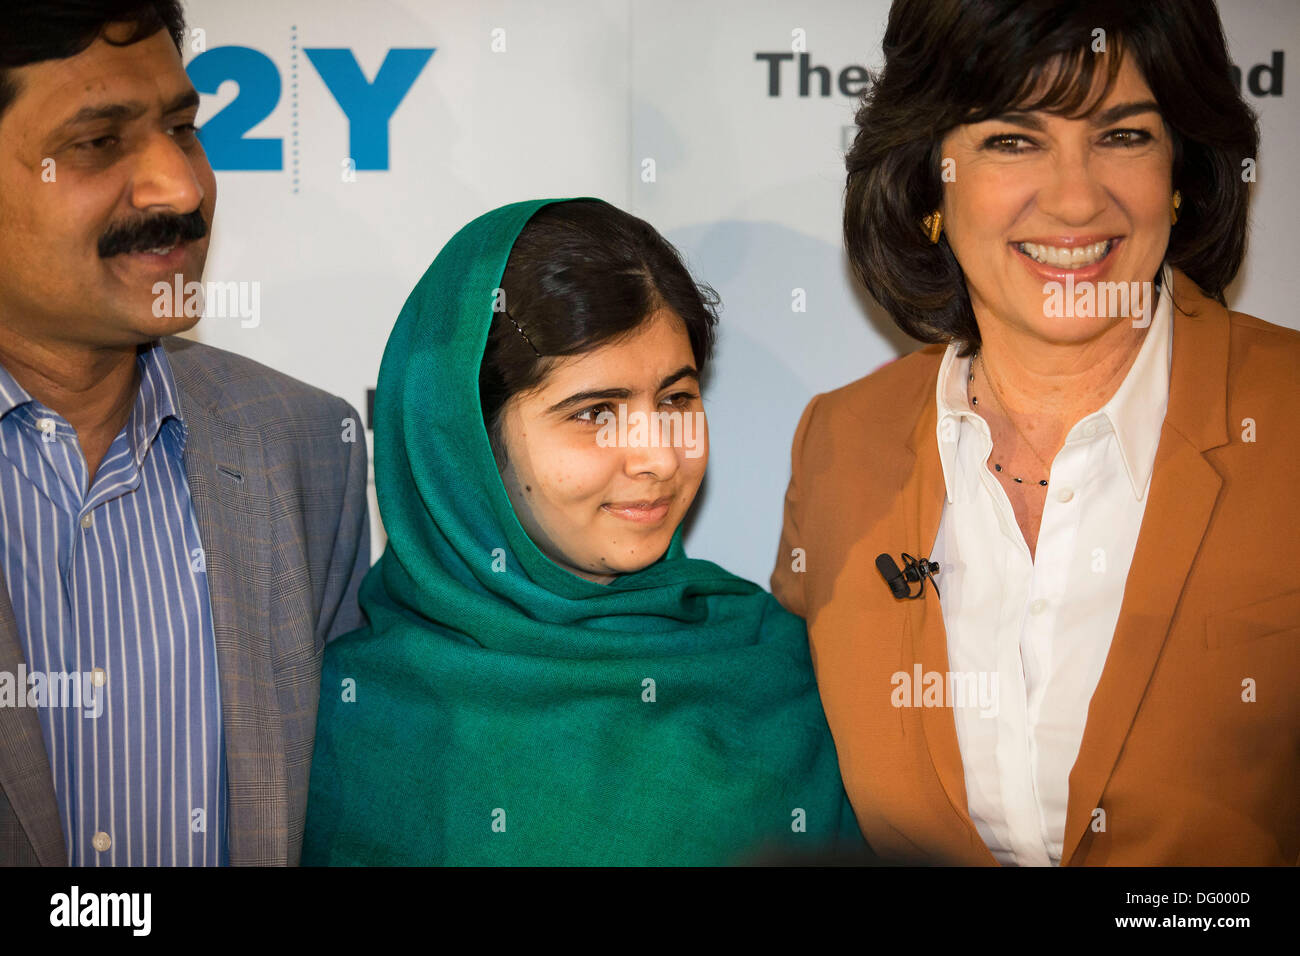 New York, NY, USA. 10th October 2013. Malala Yousafzai with her father and award winning journalist Christiane Amanpour appeared at the 92nd St Y on Manhattans upper east side. Malala when she was 15 was shot in the face by the Talaban because she advocated for education for girls. Malala is in the running for the Nobel Peace Prize. Credit:  Scott Houston/Alamy Live News Stock Photo